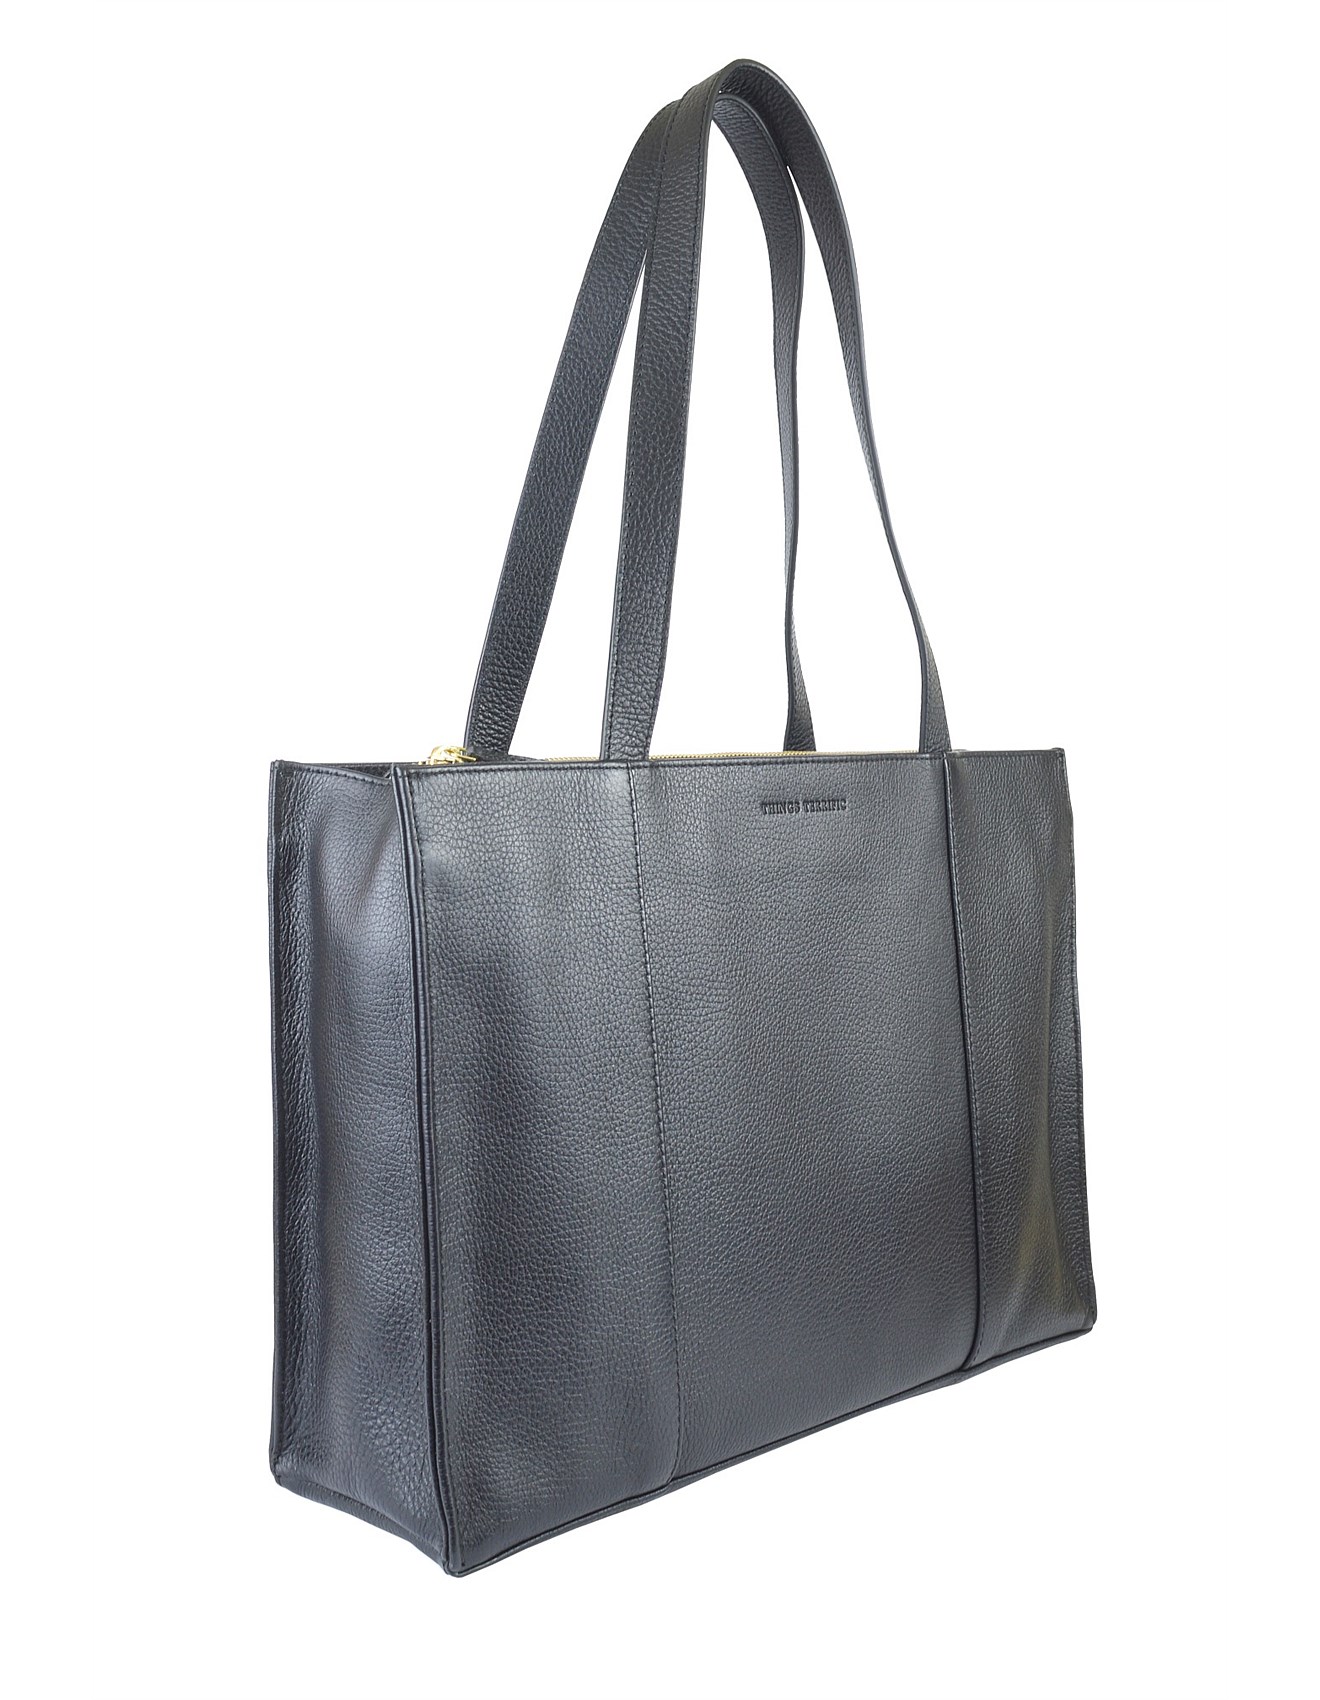 Tote Bags - Eye-Catching Totes Designed Online